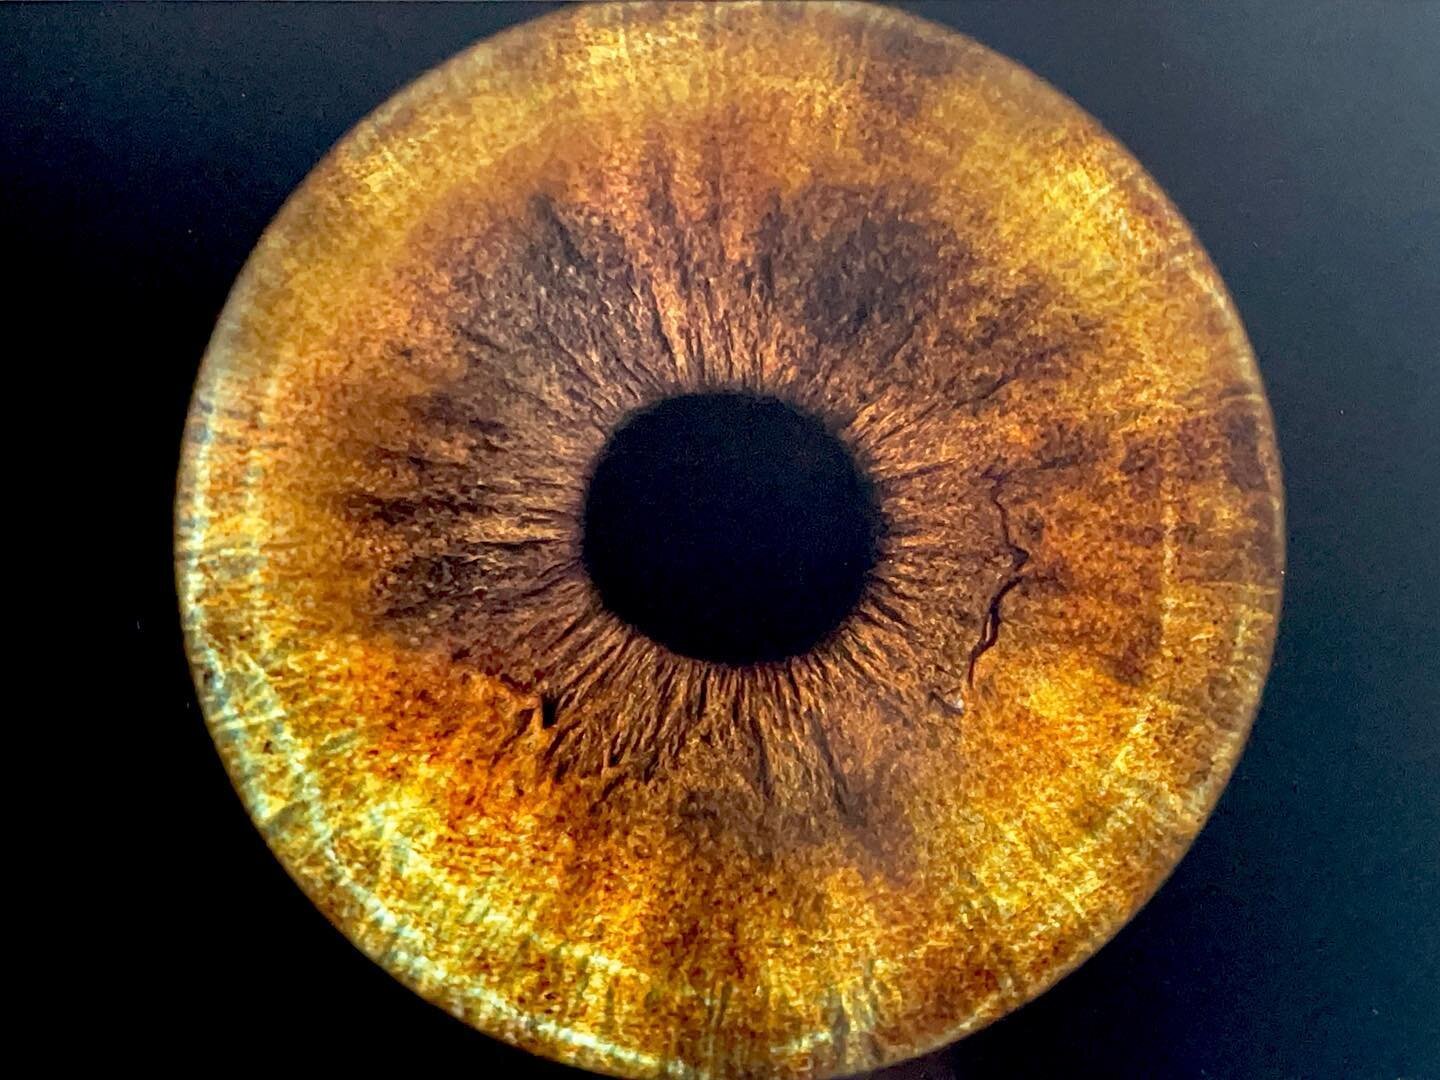 Wandered by a place that scans irises. This is mine. The family that operated it was so sweet, and had just opened the shop on Monday. Such a fun experience! #eyemazyreykjavik